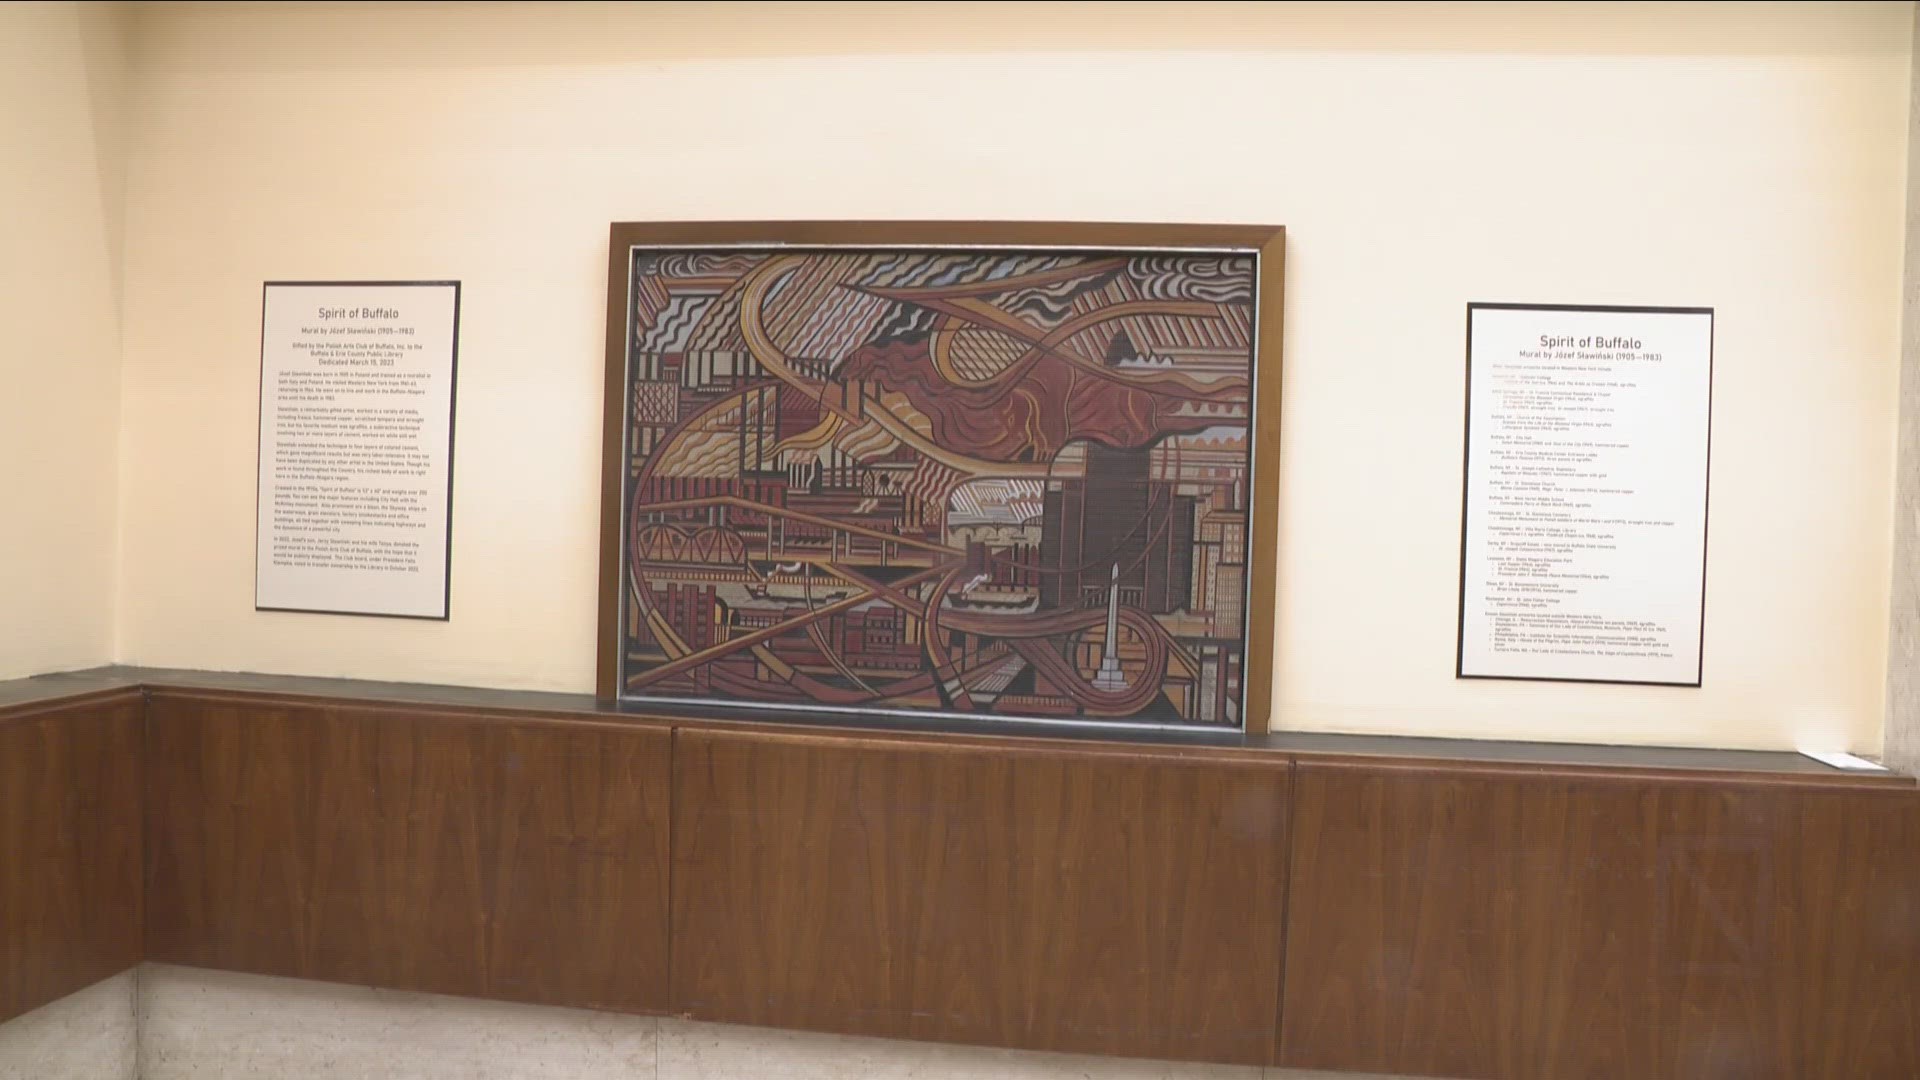 'Spirit of Buffalo' mural was gifted to the library by the Polish Arts Club of Buffalo.